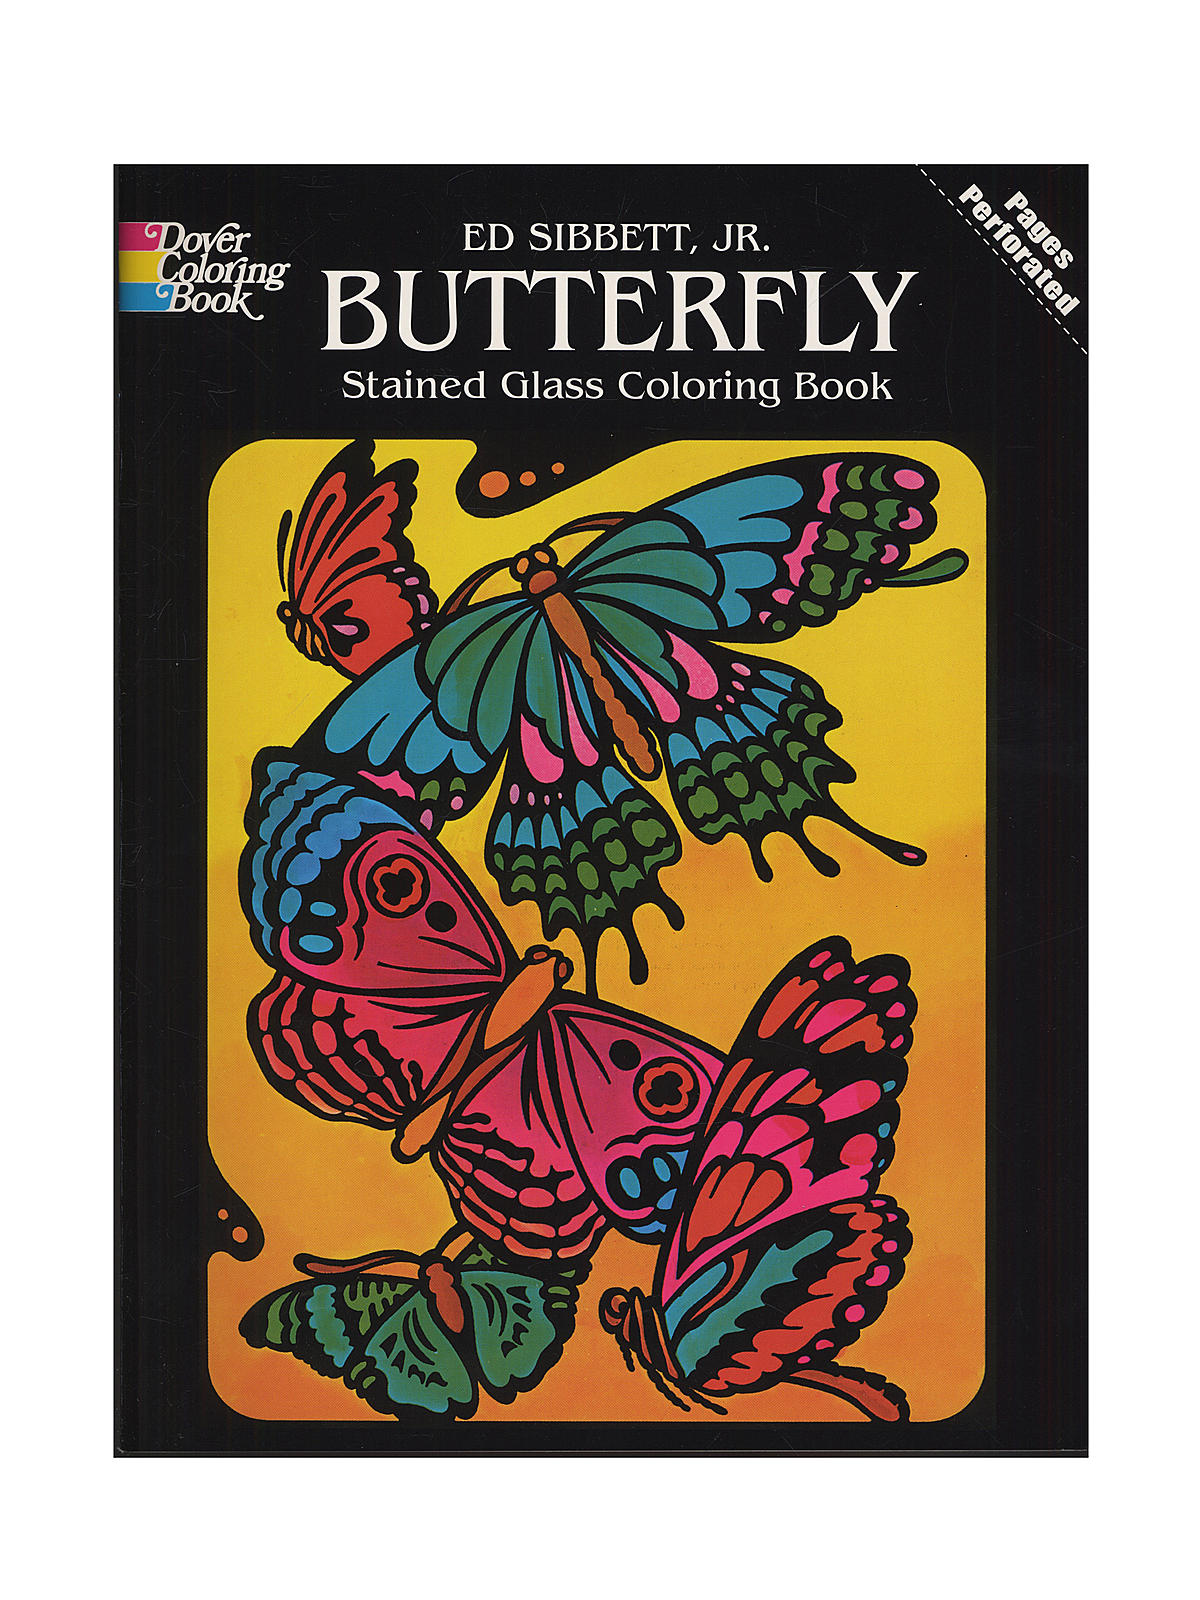 Butterfly Stained Glass Coloring Book Butterfly Stained Glass Coloring Book